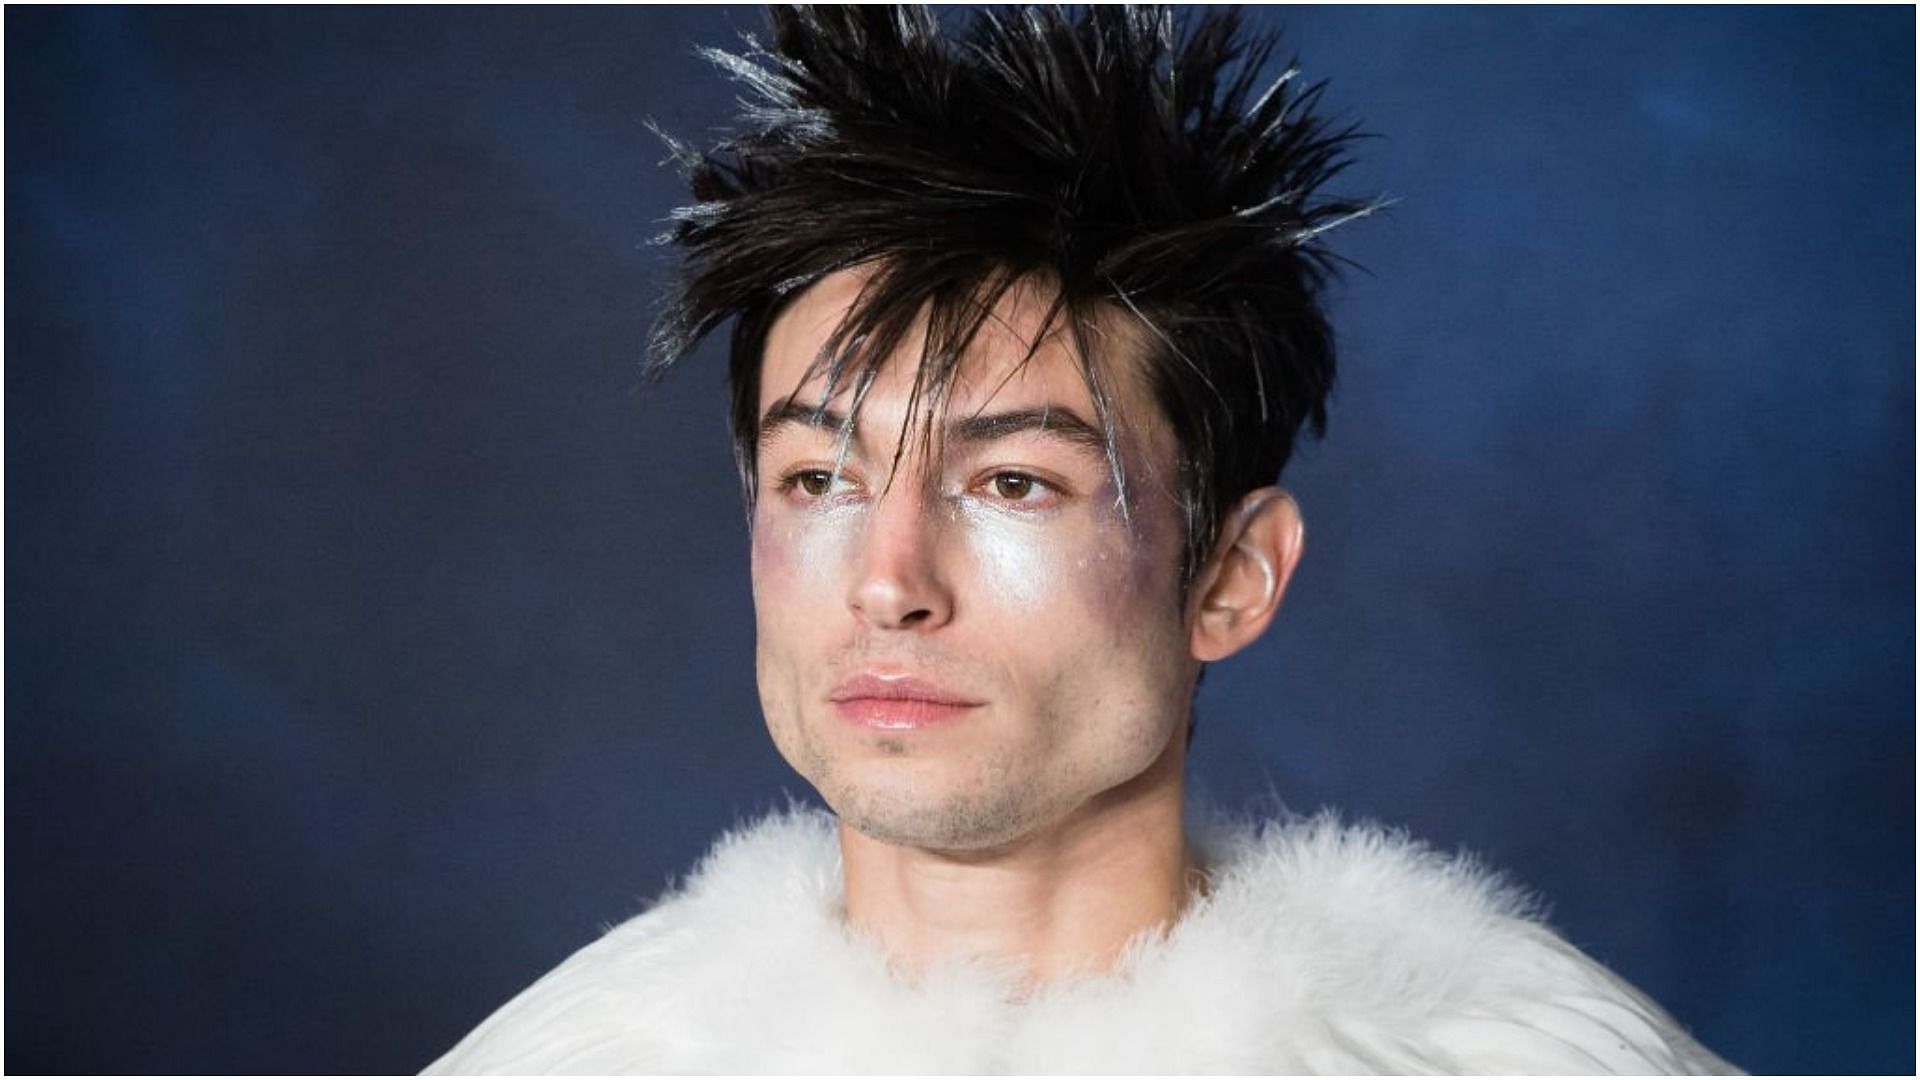 Ezra Miller was recently arrested in Hilo, Hawaii (Image via Samie Hussein/Getty Images)